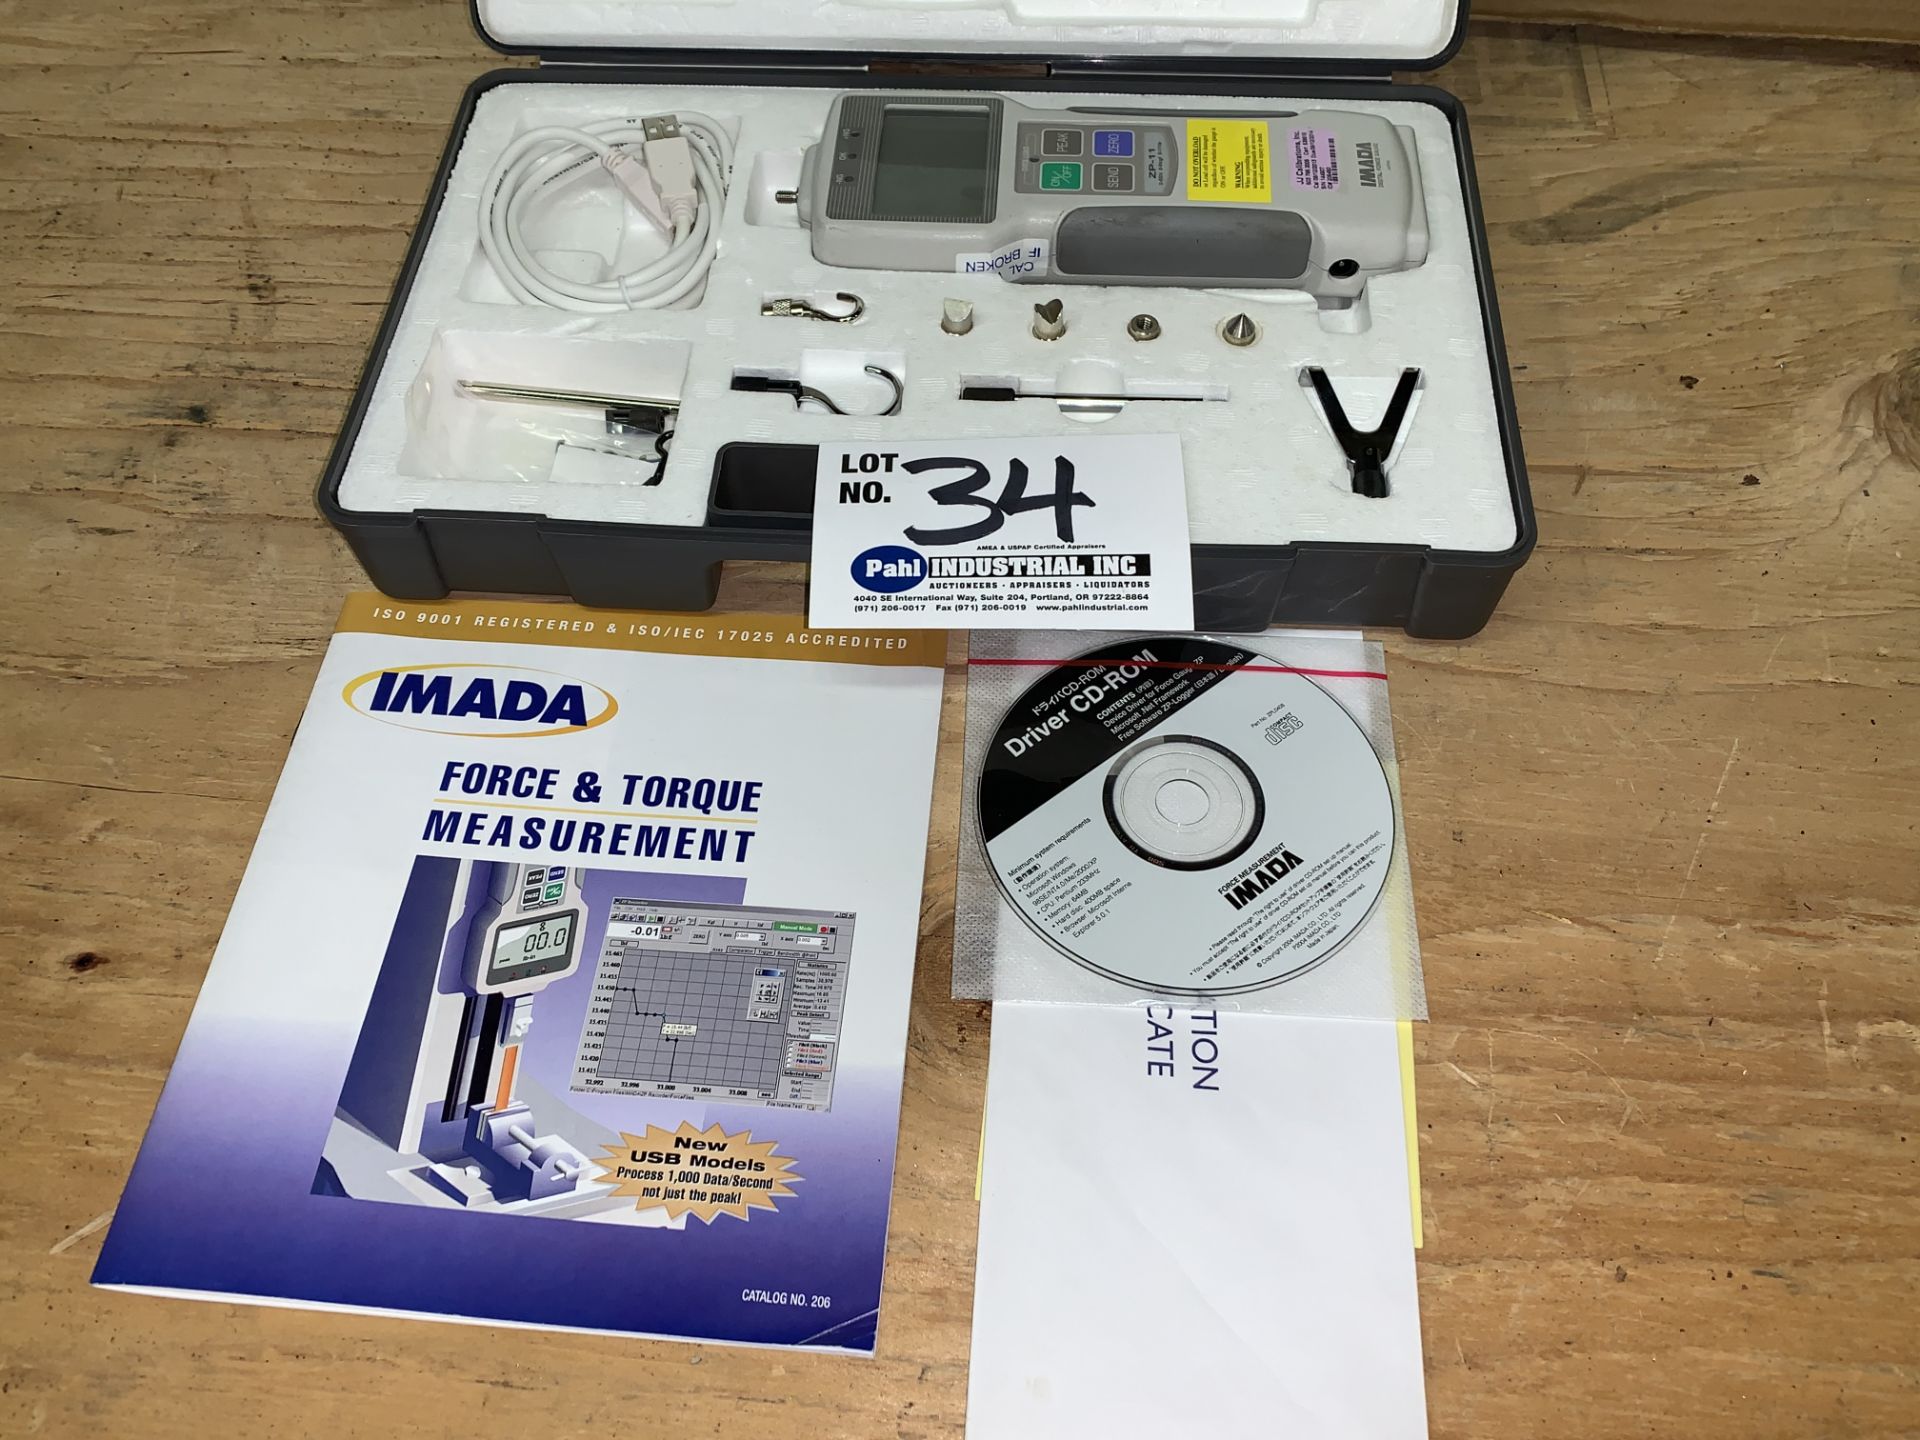 New Imada Force and Torque Measurement Tool with software, instructions, Complete Set